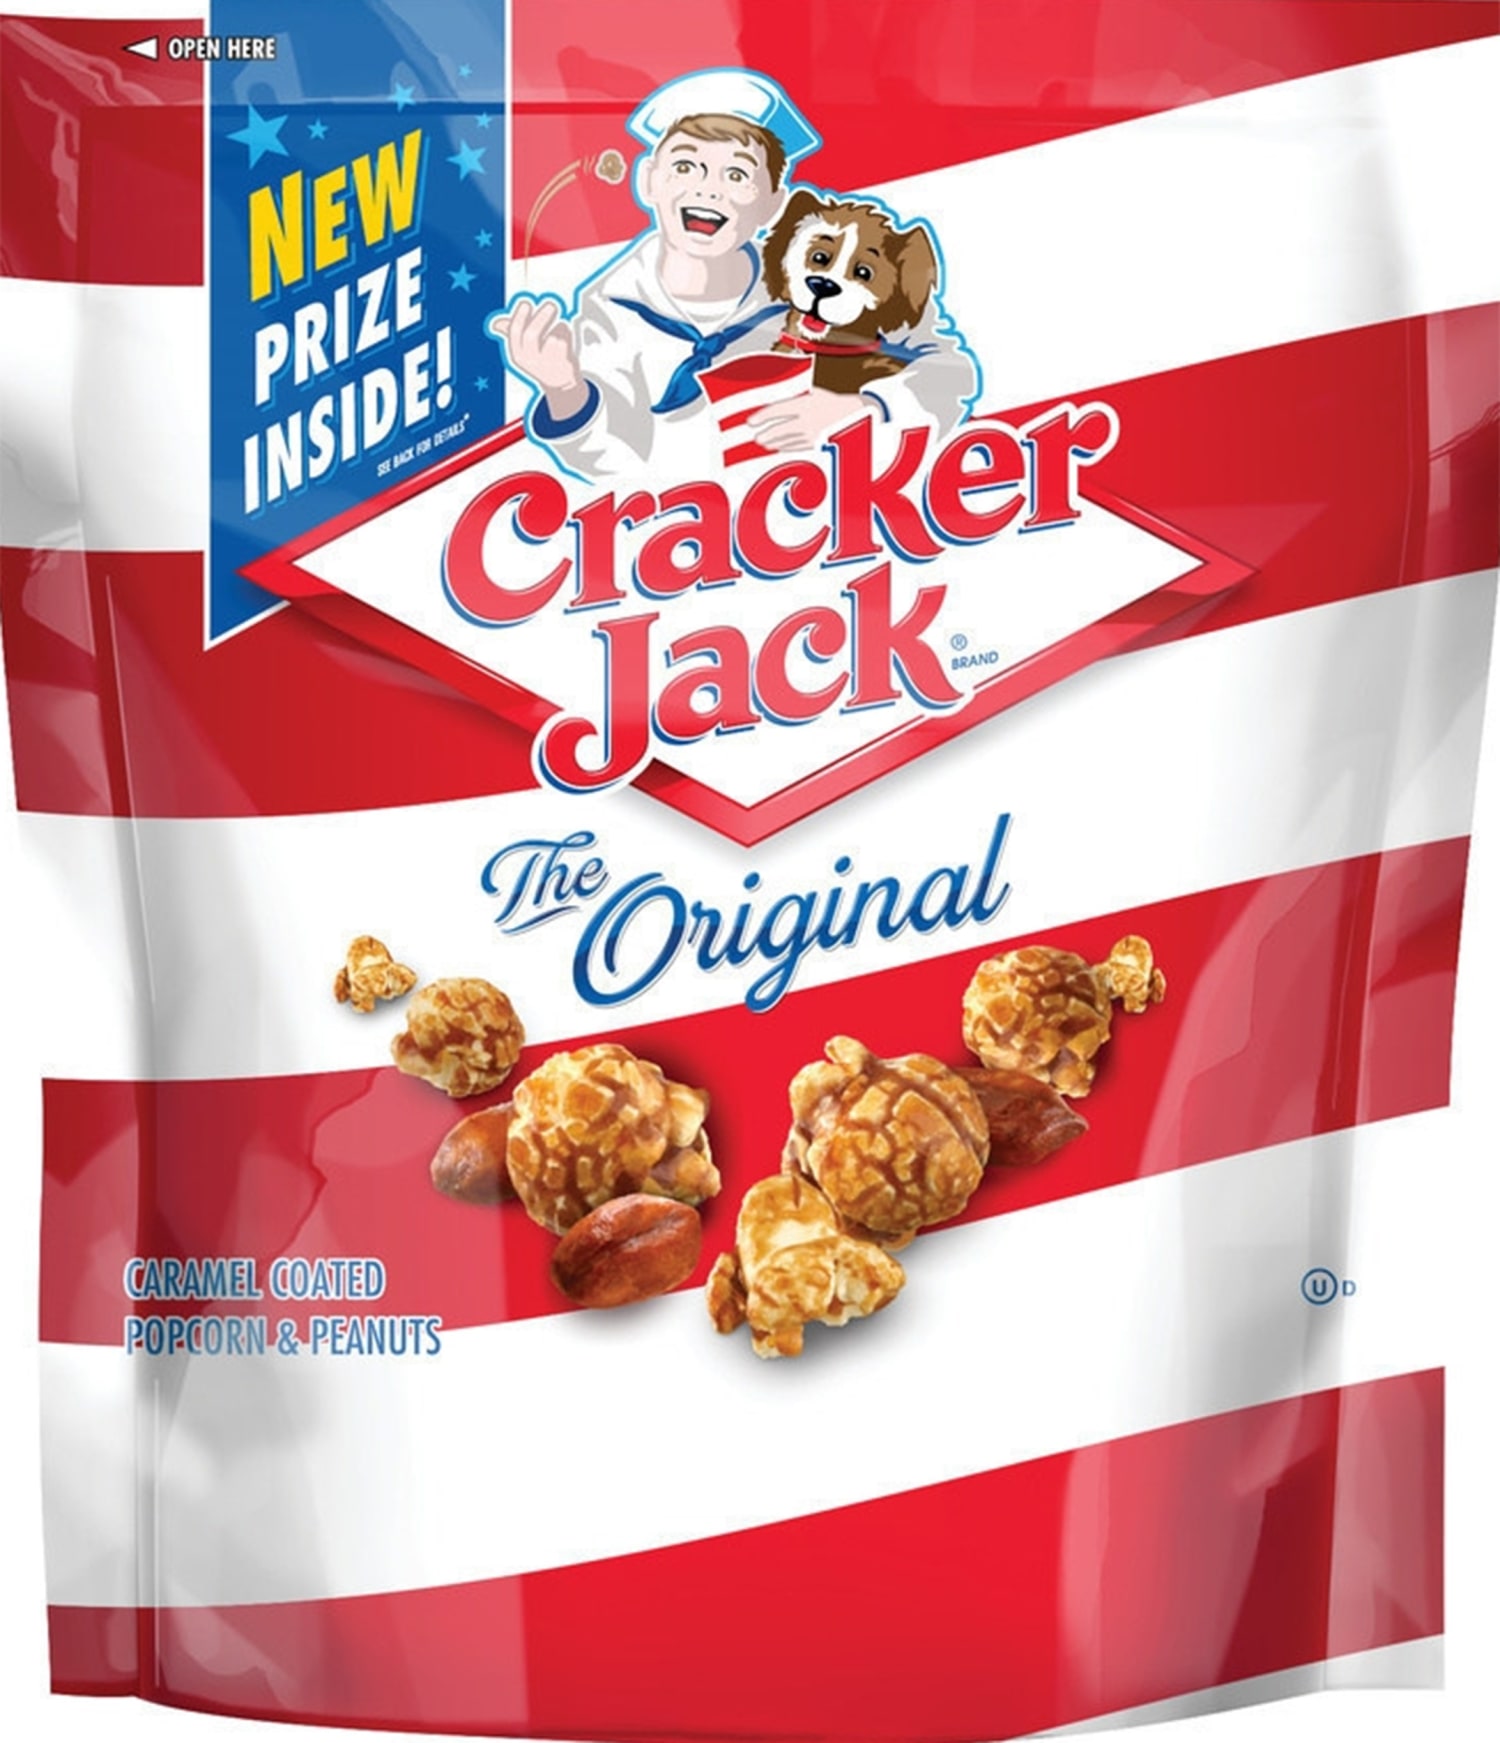 Prizes jack most cracker valuable What are